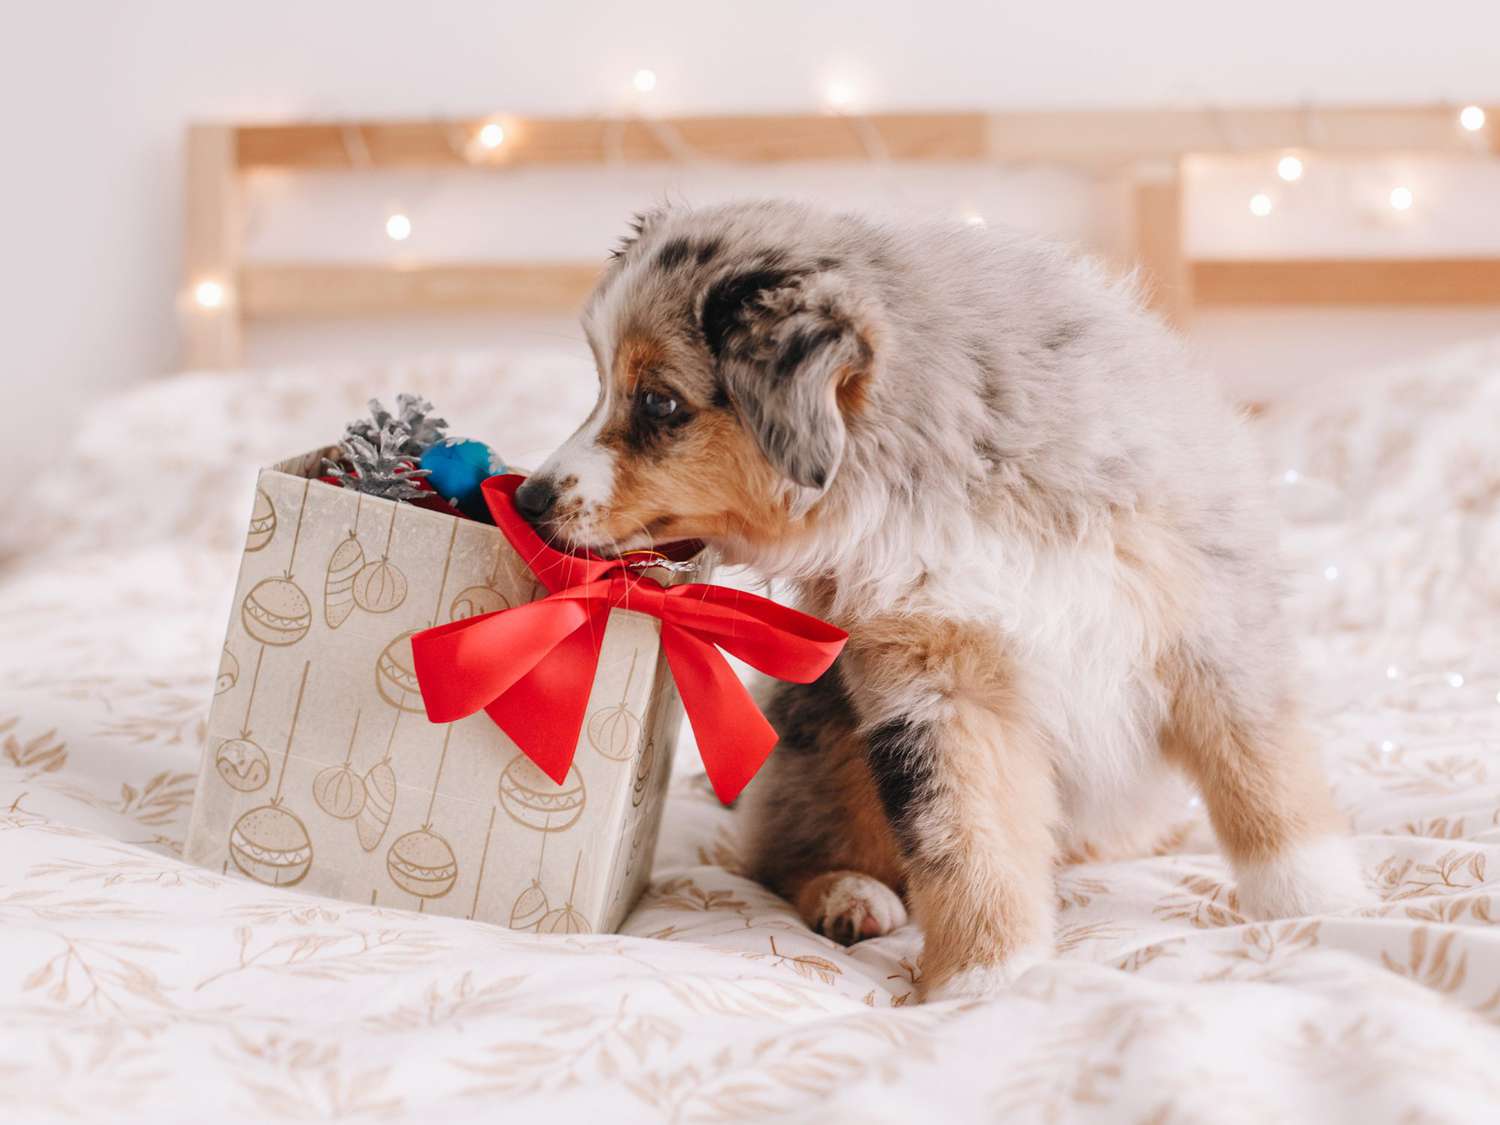 Puppy Sitting On Bed At Home With Christmas Gift Box